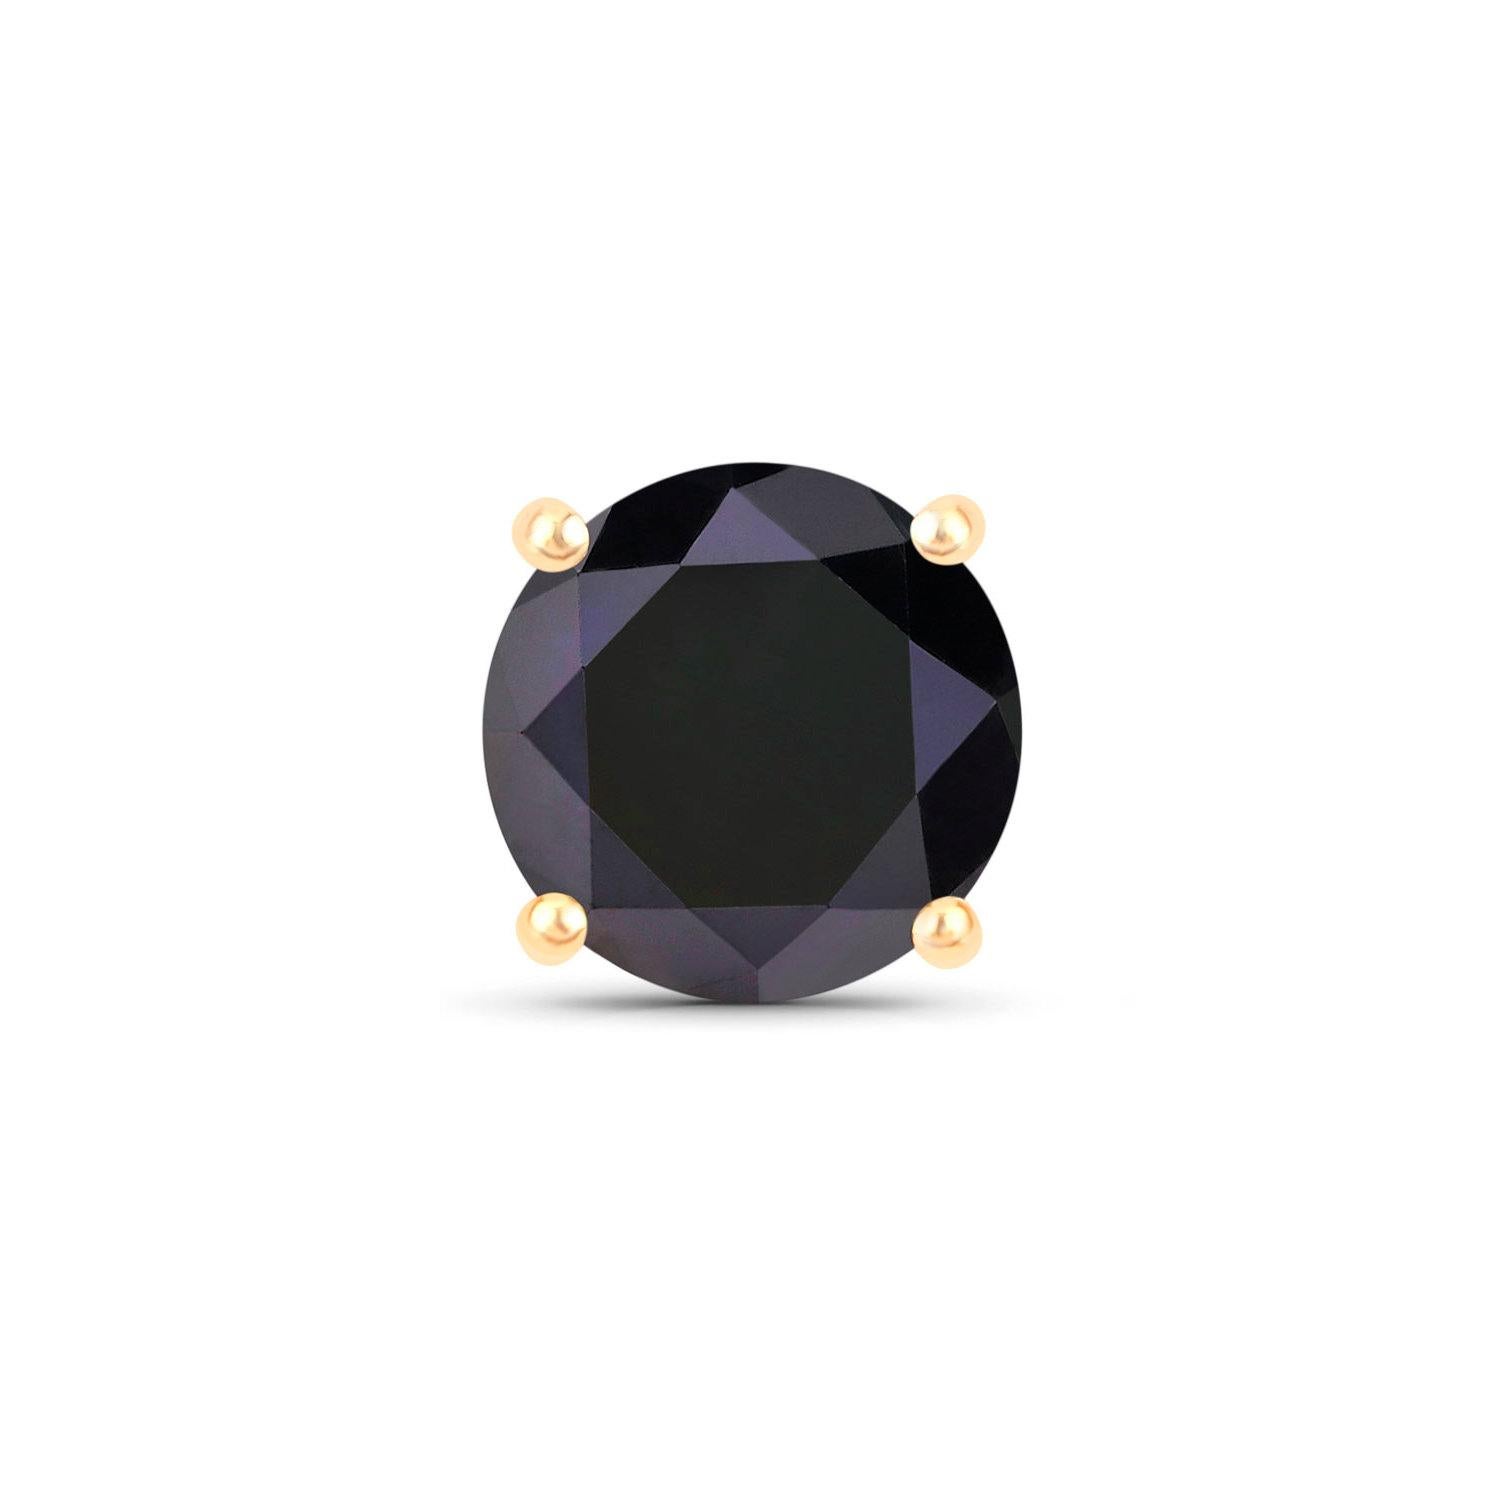 Black Diamond Stud Earrings 5.41 Carats 14K Yellow Gold In Excellent Condition For Sale In Laguna Niguel, CA